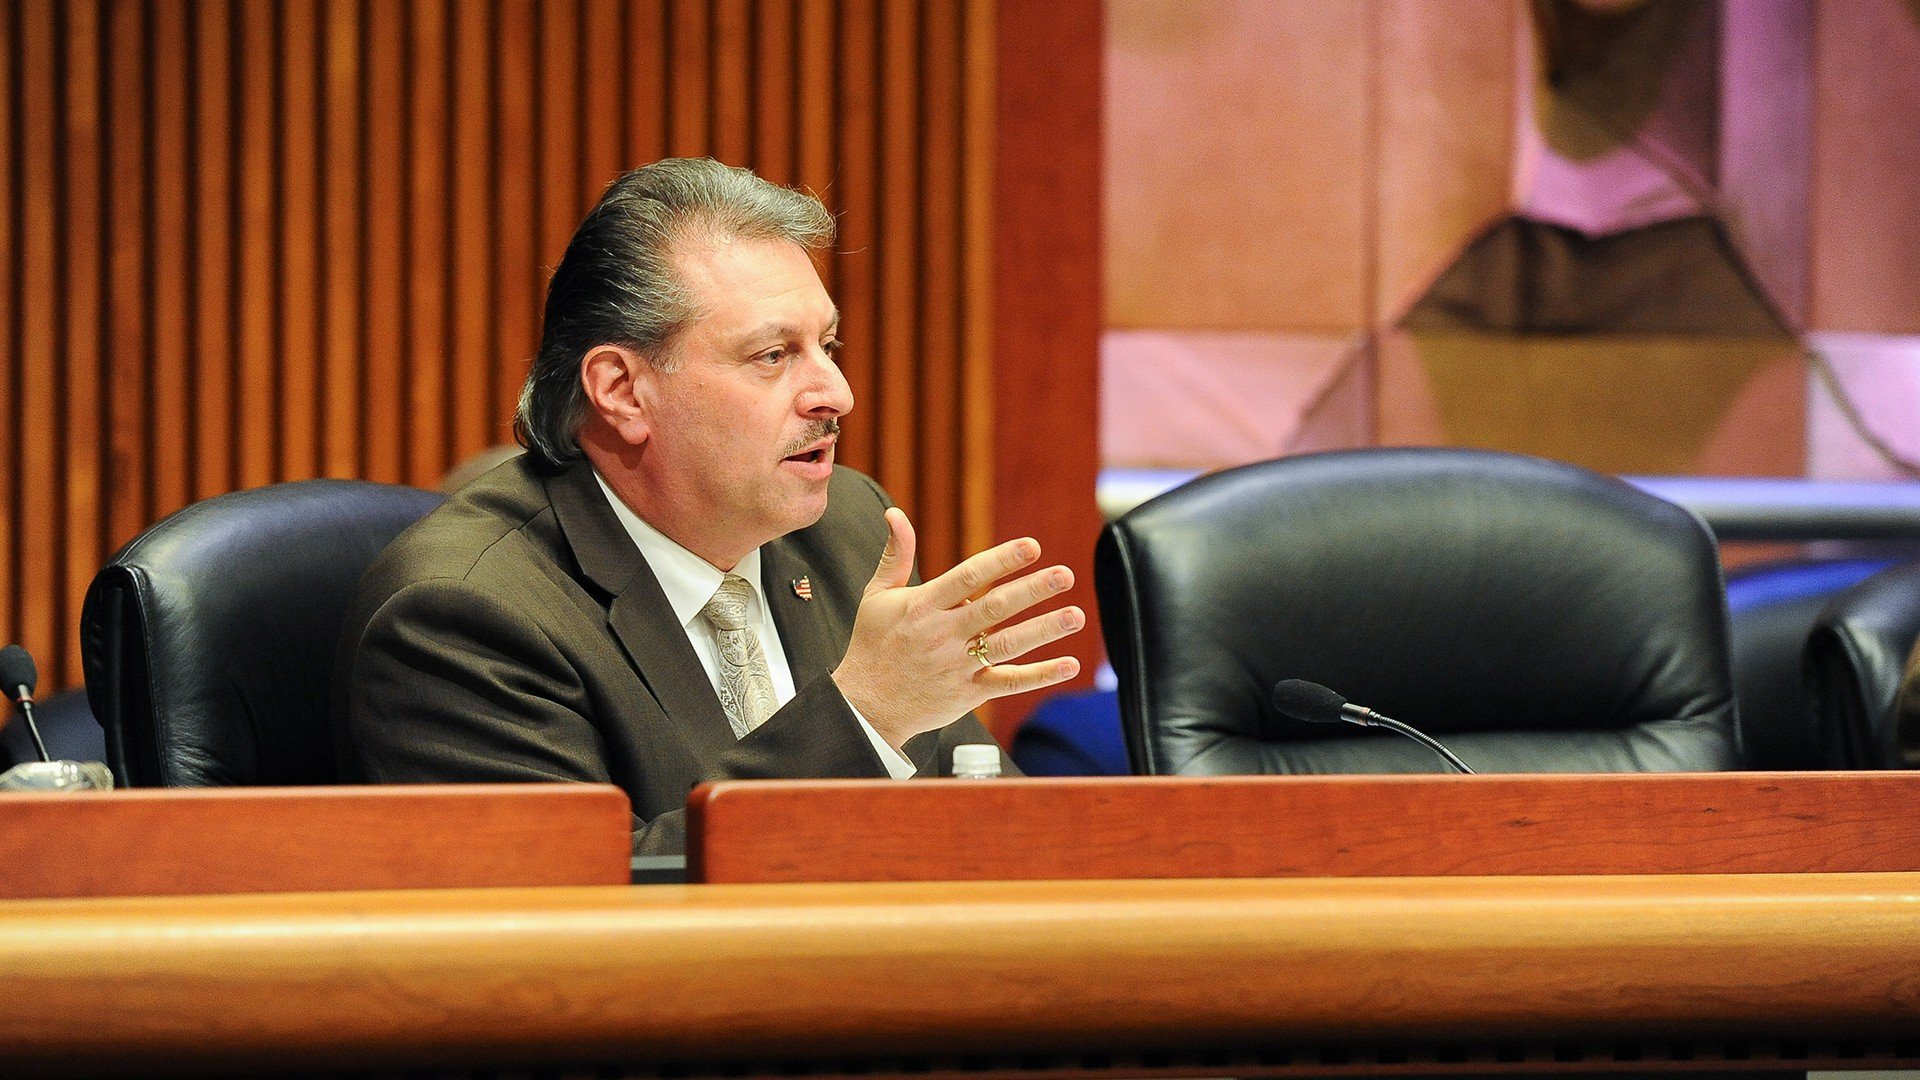 NY Senator Addabbo calls for further responsible gambling efforts as state explores iGaming expansion